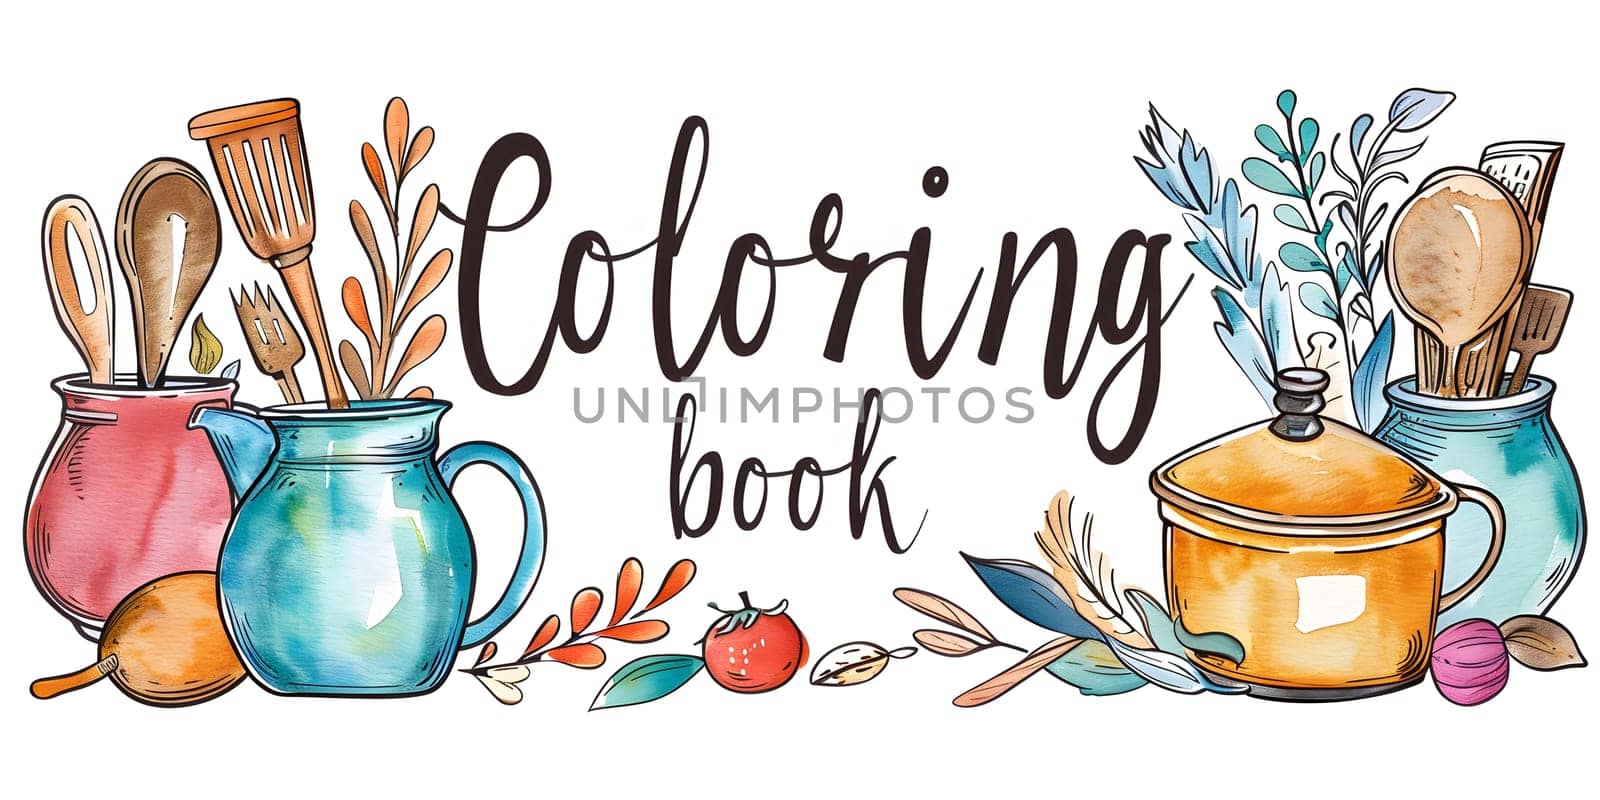 Handwriting logo featuring tableware and utensils for a coloring book by Nadtochiy